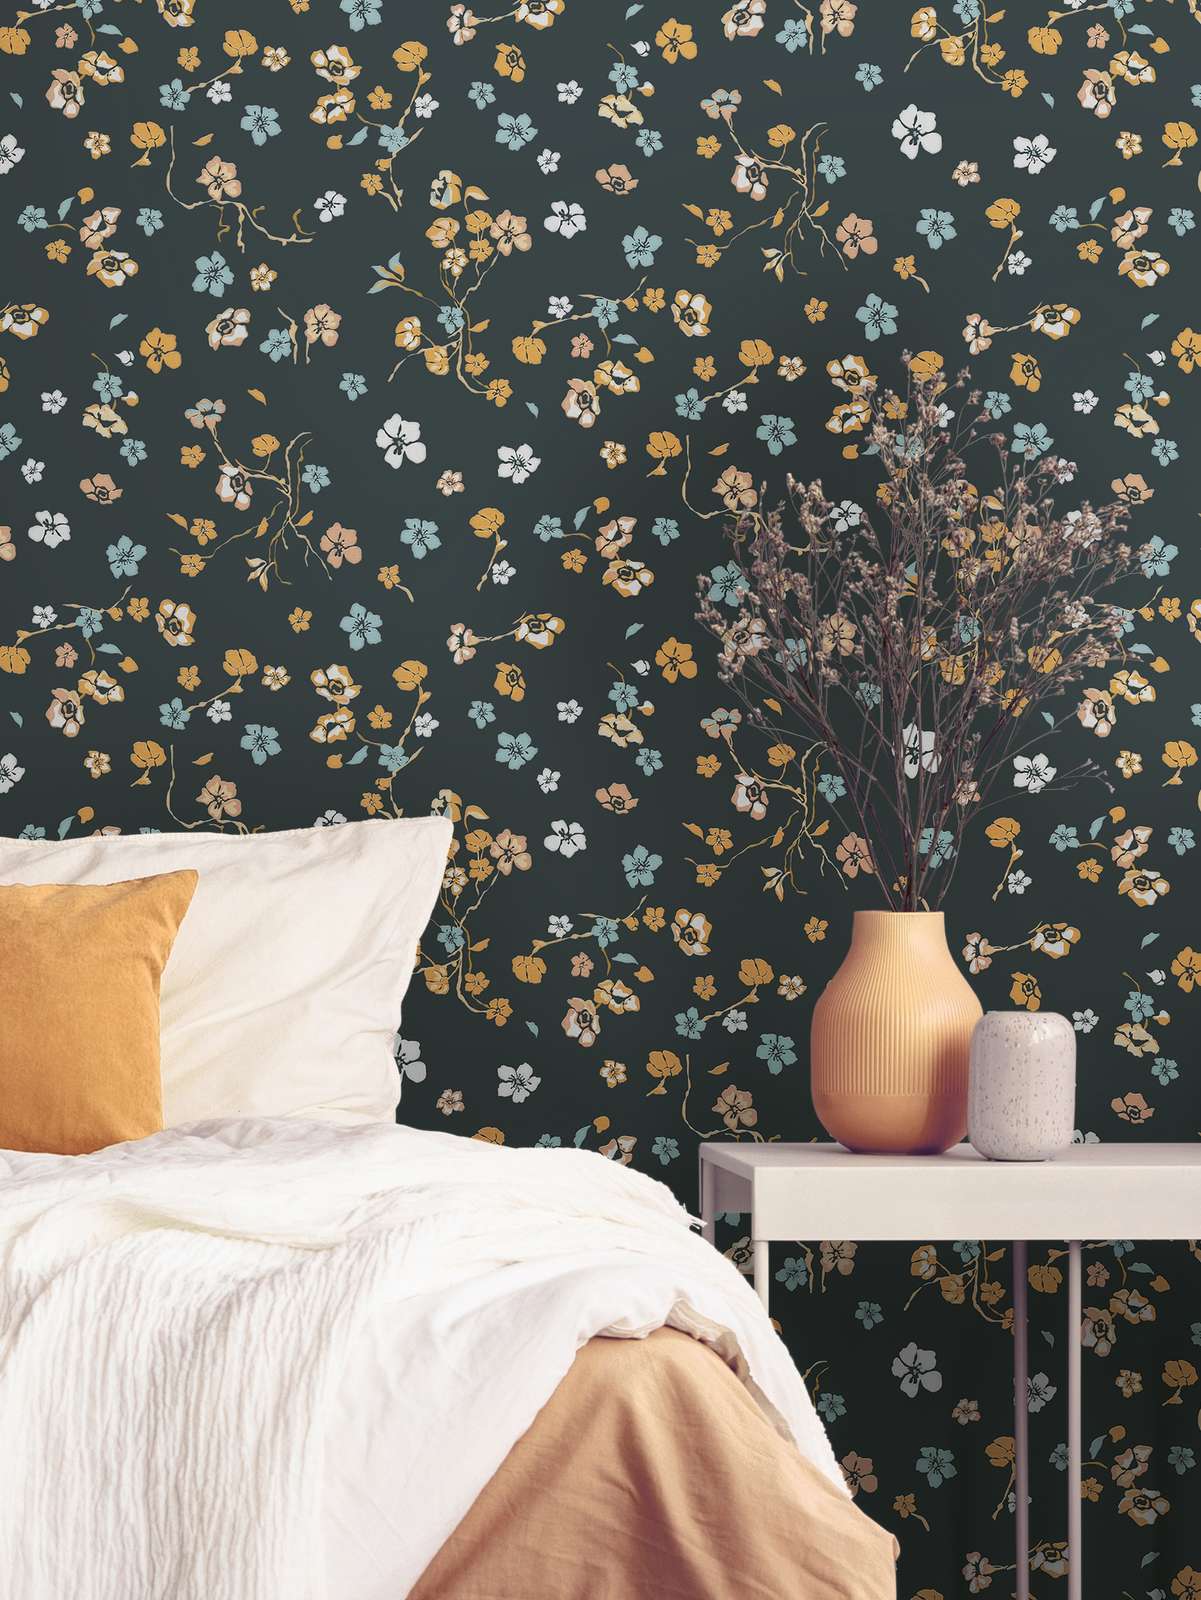             Floral wallpaper with glossy effect & textured pattern - black, gold, turquoise
        